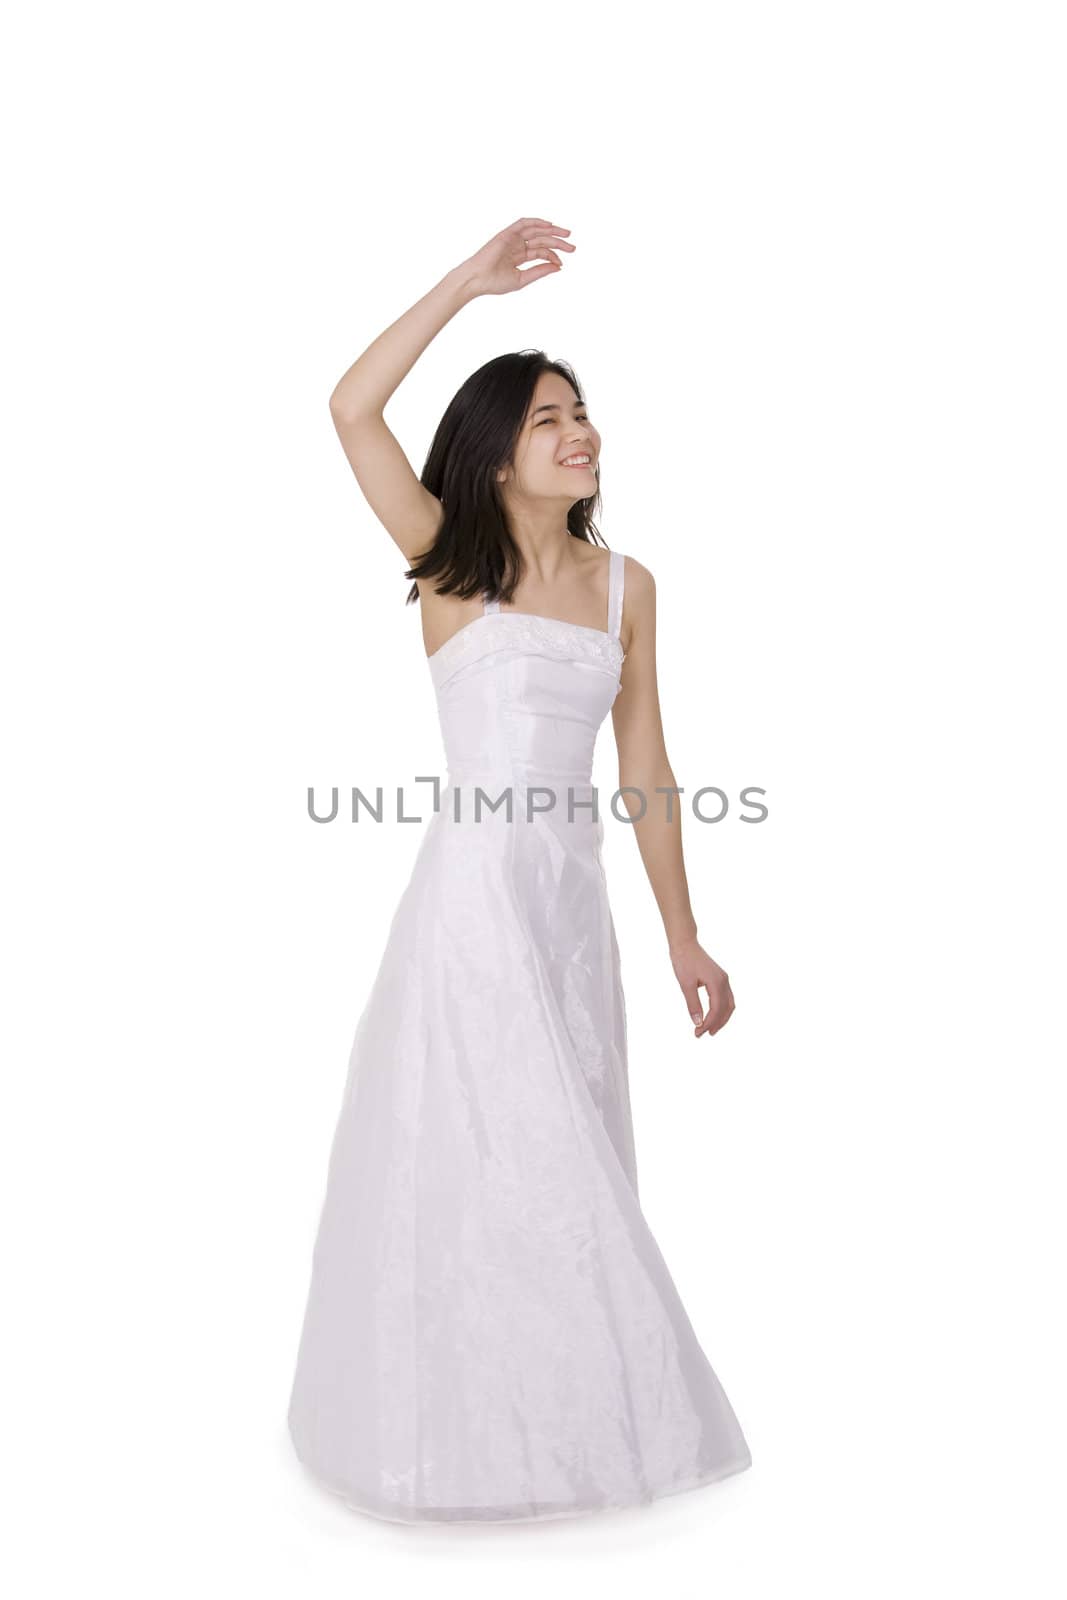 Beautiful young teen girl in white dress or gown twirling by jarenwicklund